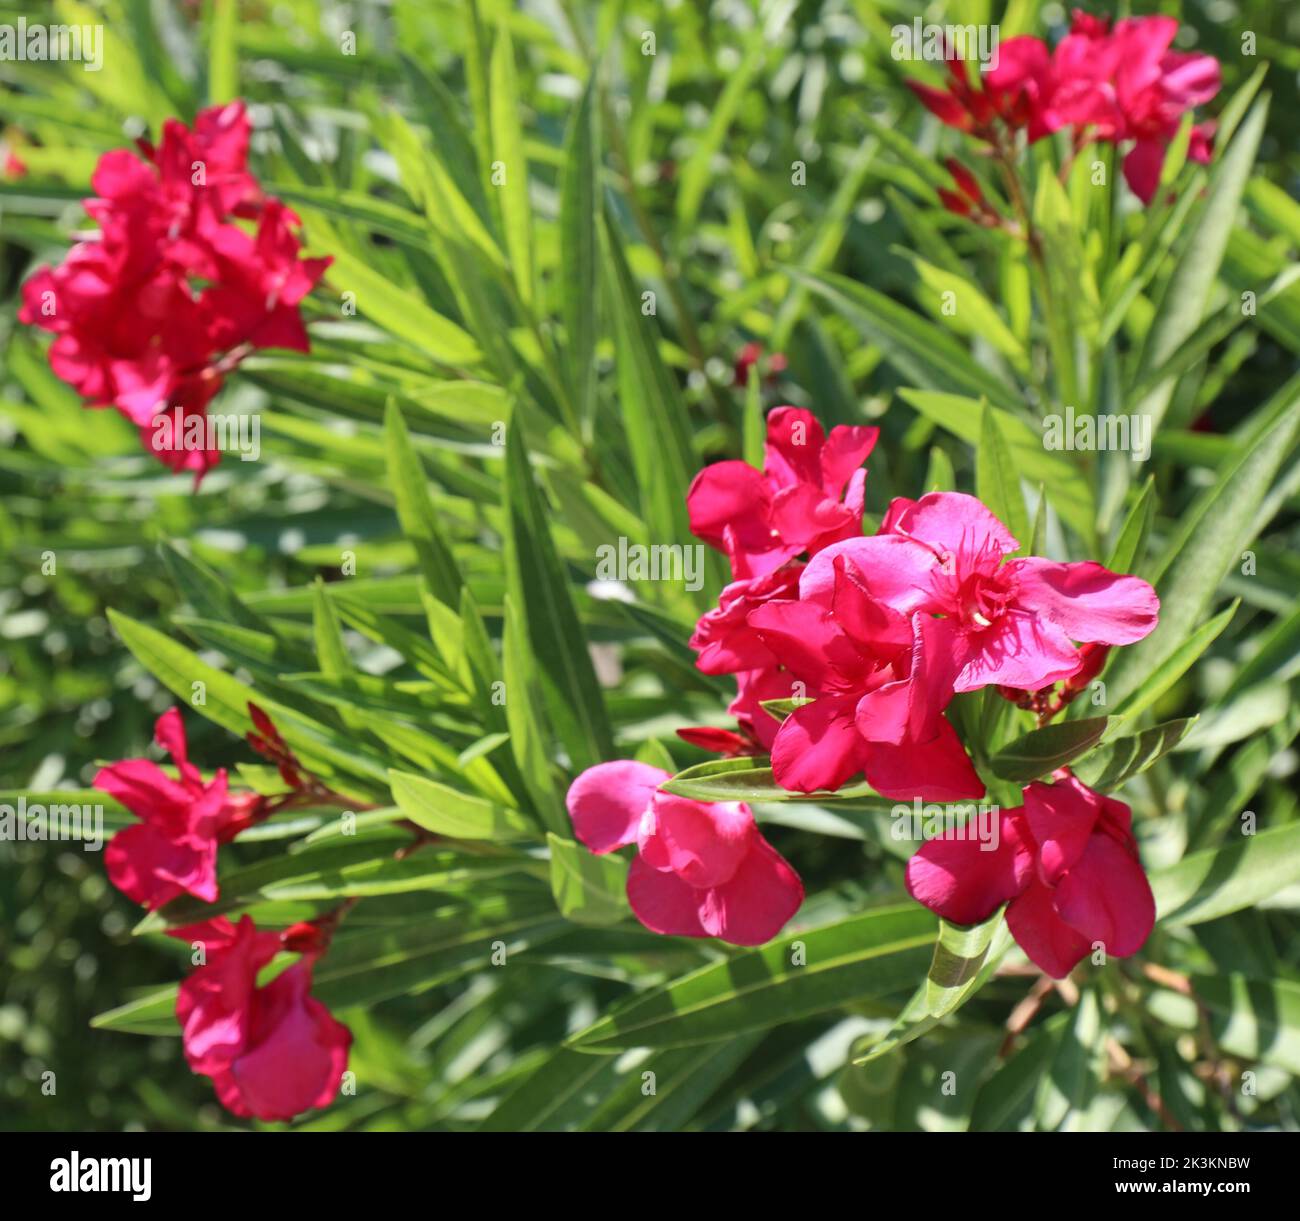 oleander flowers the typical flowering plant of the Mediterranean area that blooms in summer Stock Photo